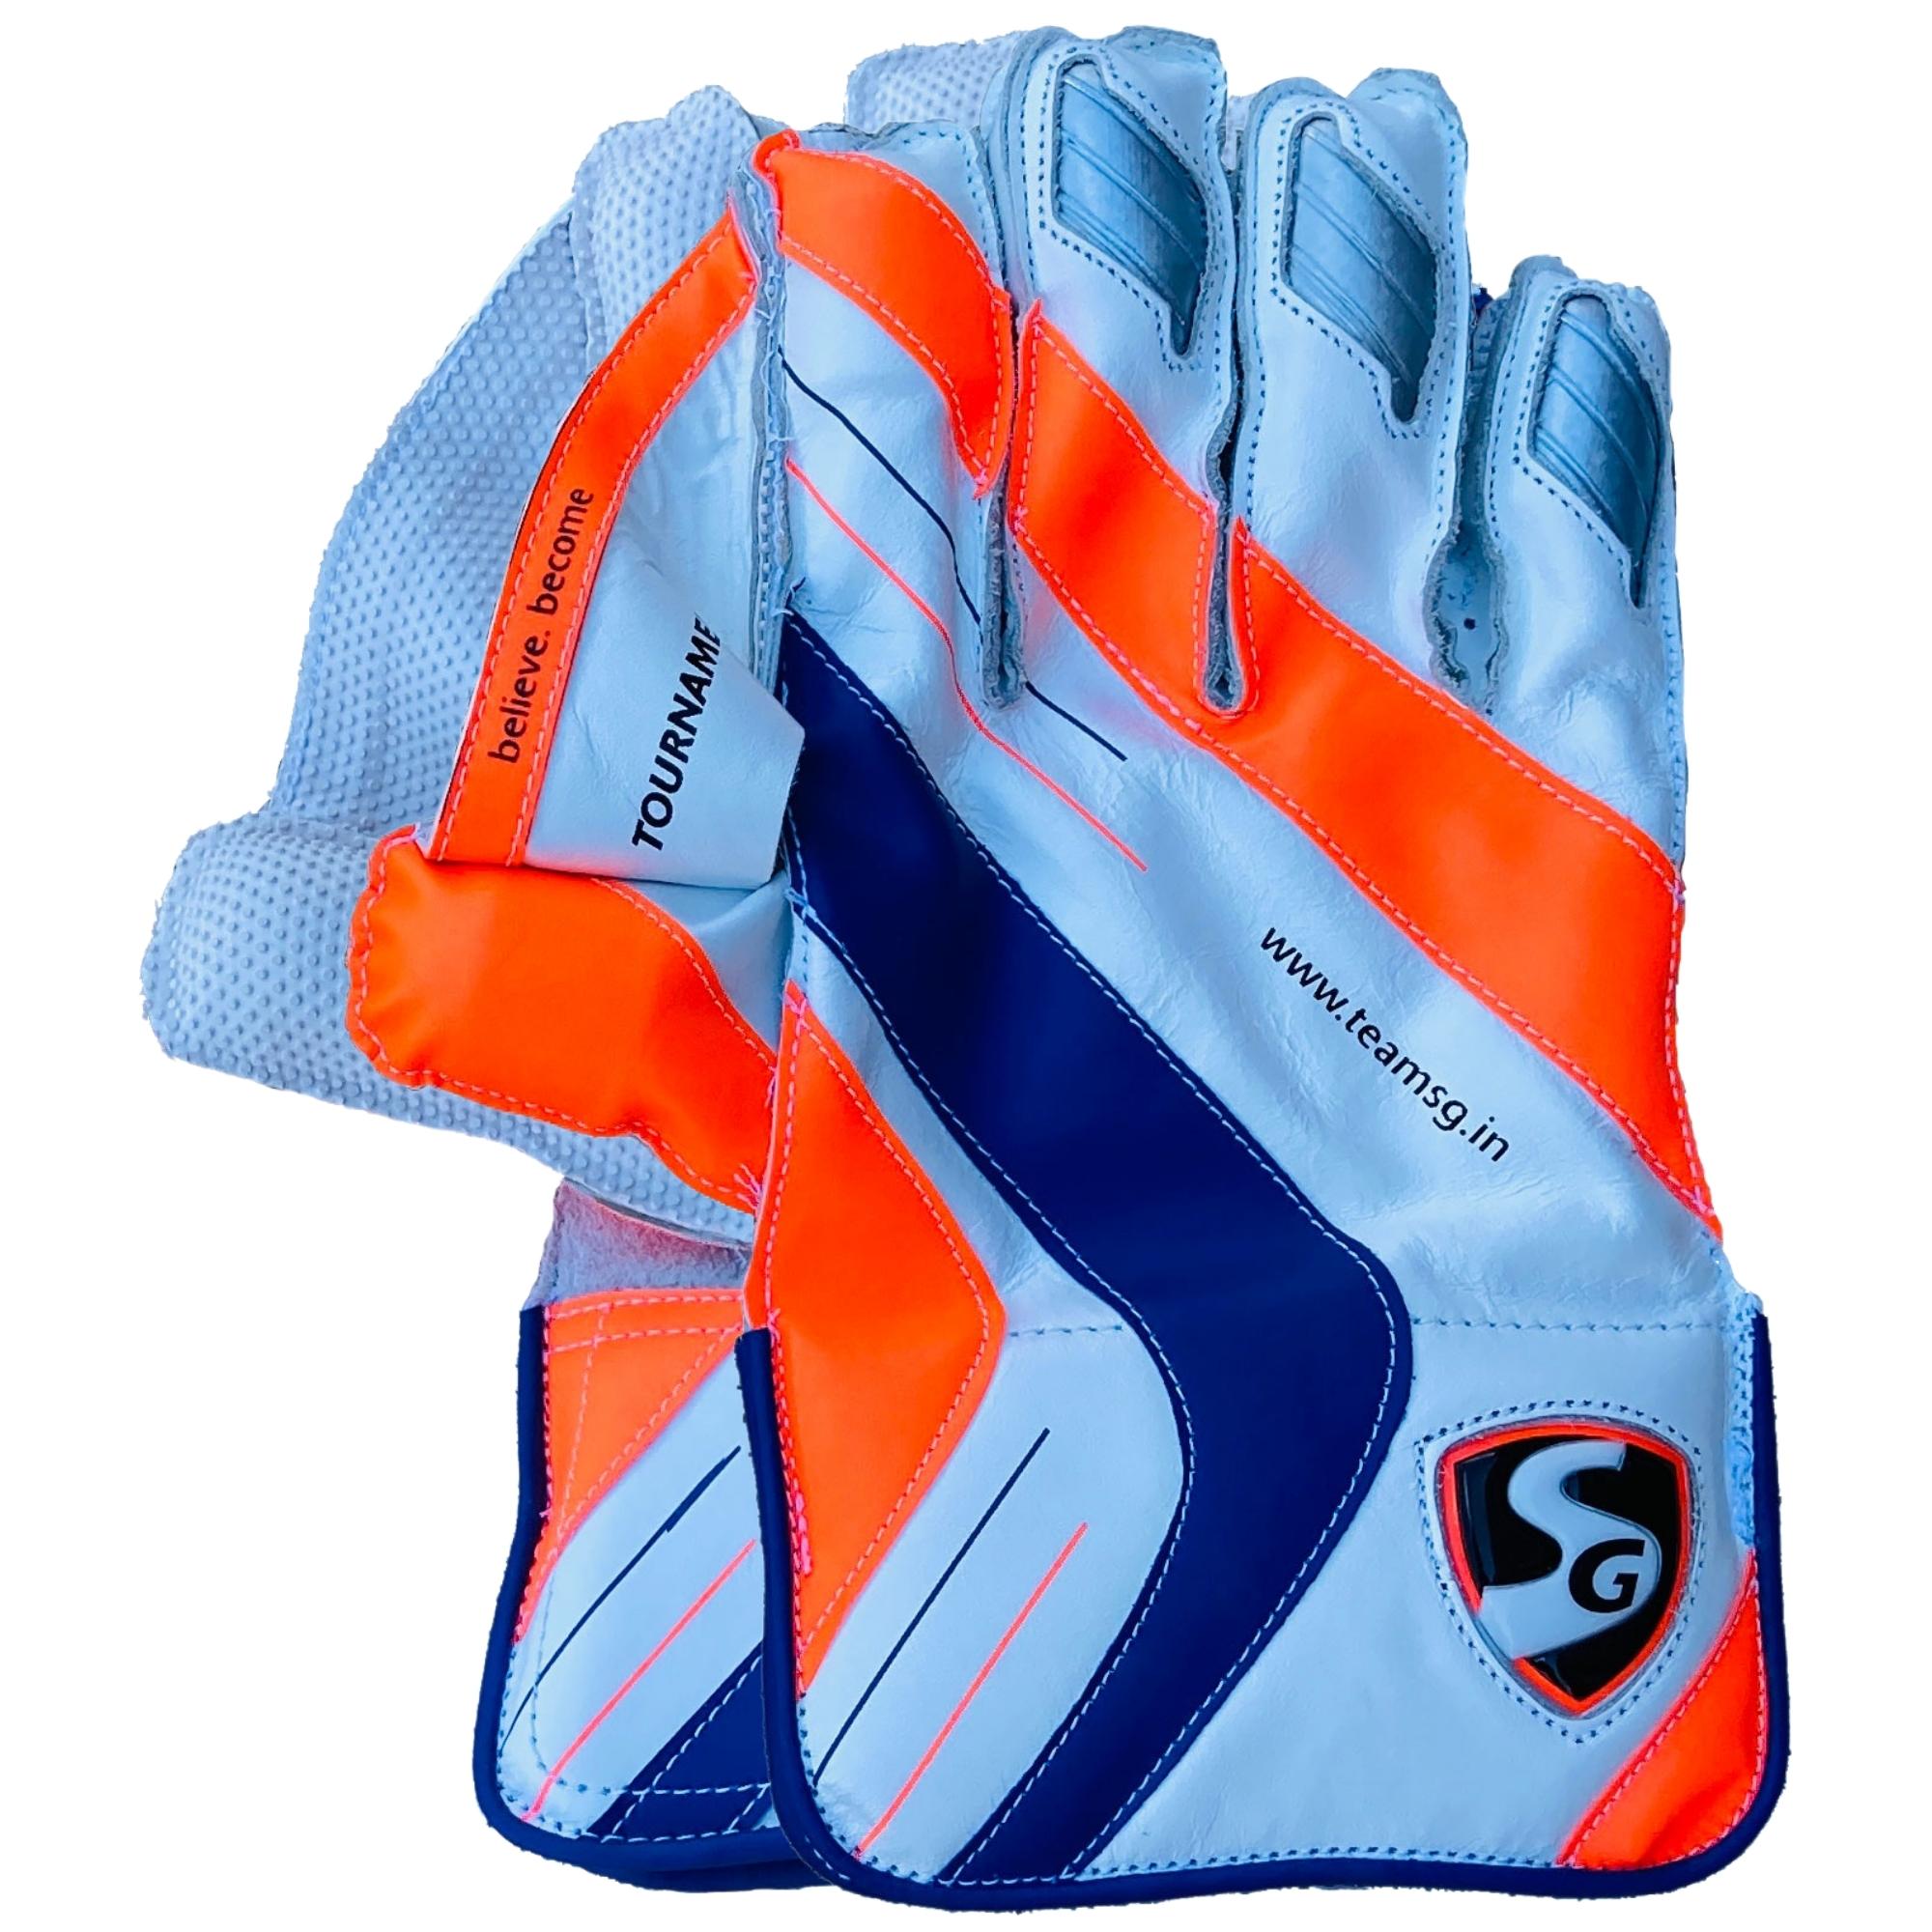 SG Wicket Keeping Gloves | SG Tournament